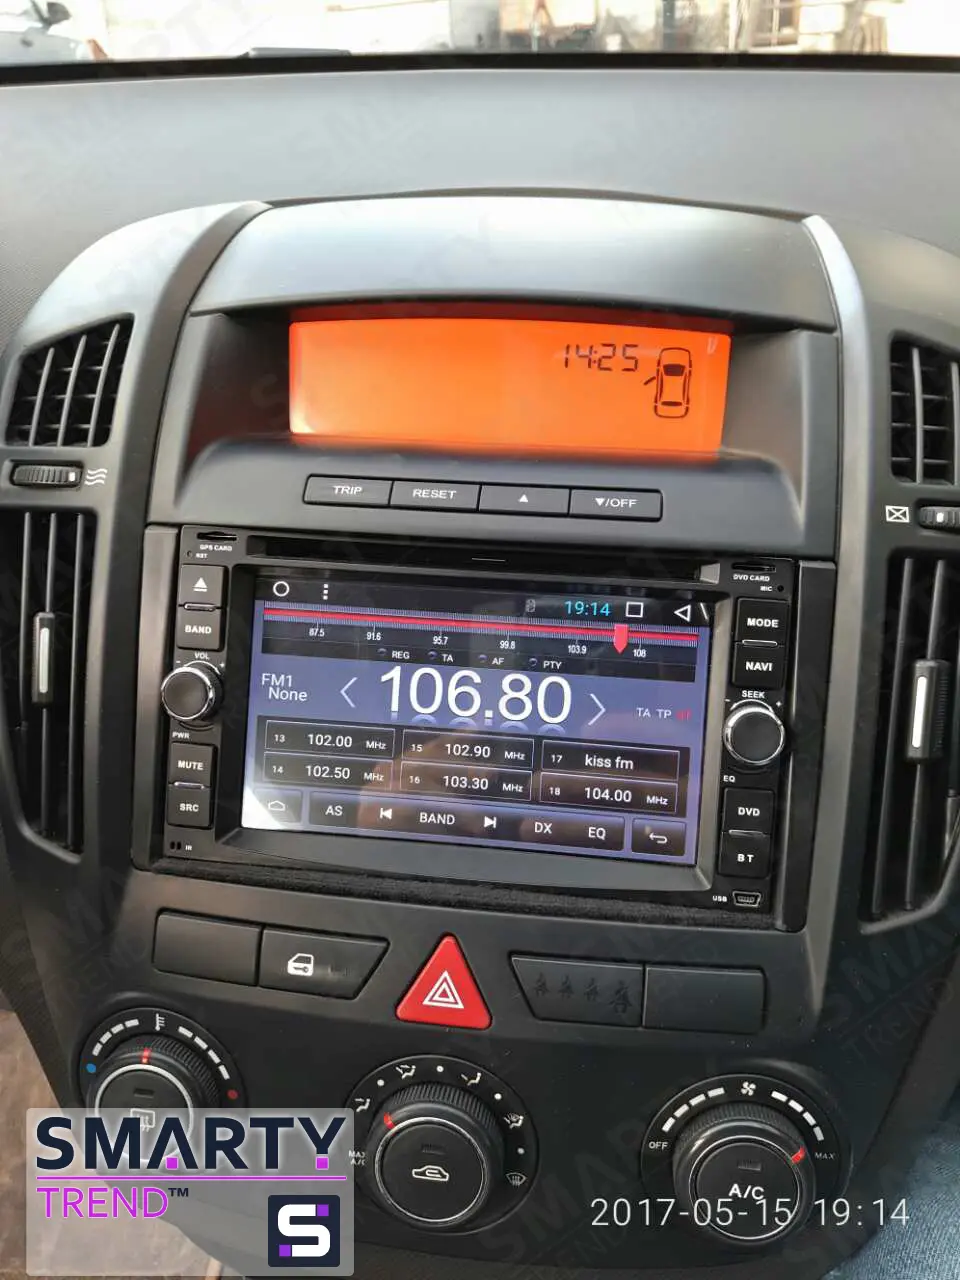 The SMARTY Trend head unit for KIA Ceed